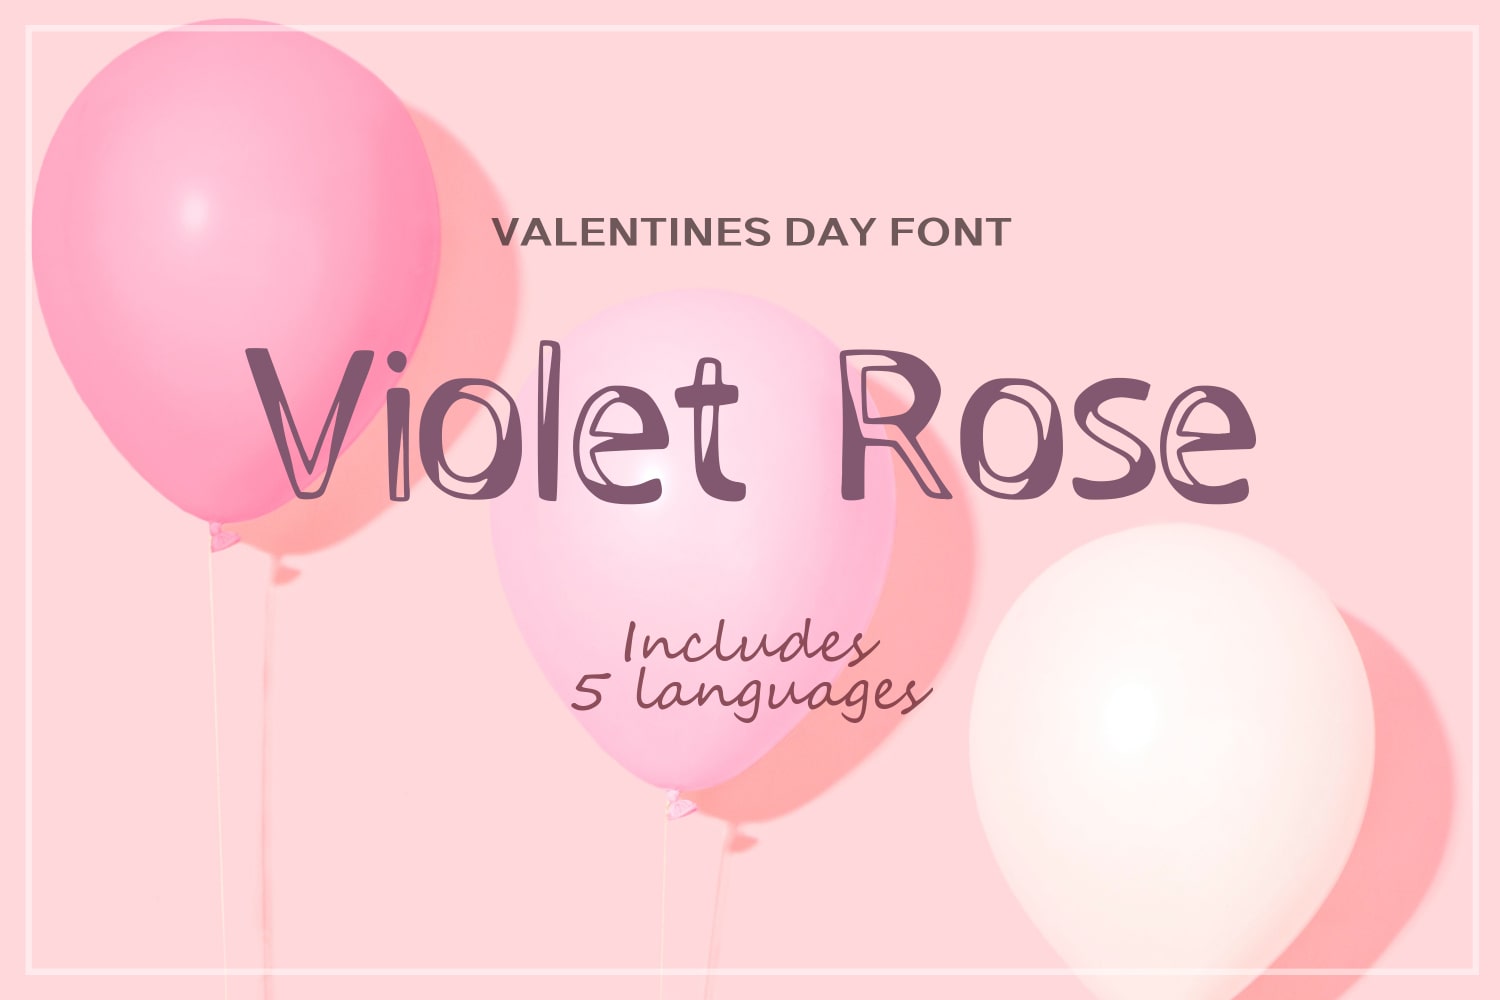 Cool pink font for perfect romantic evening.